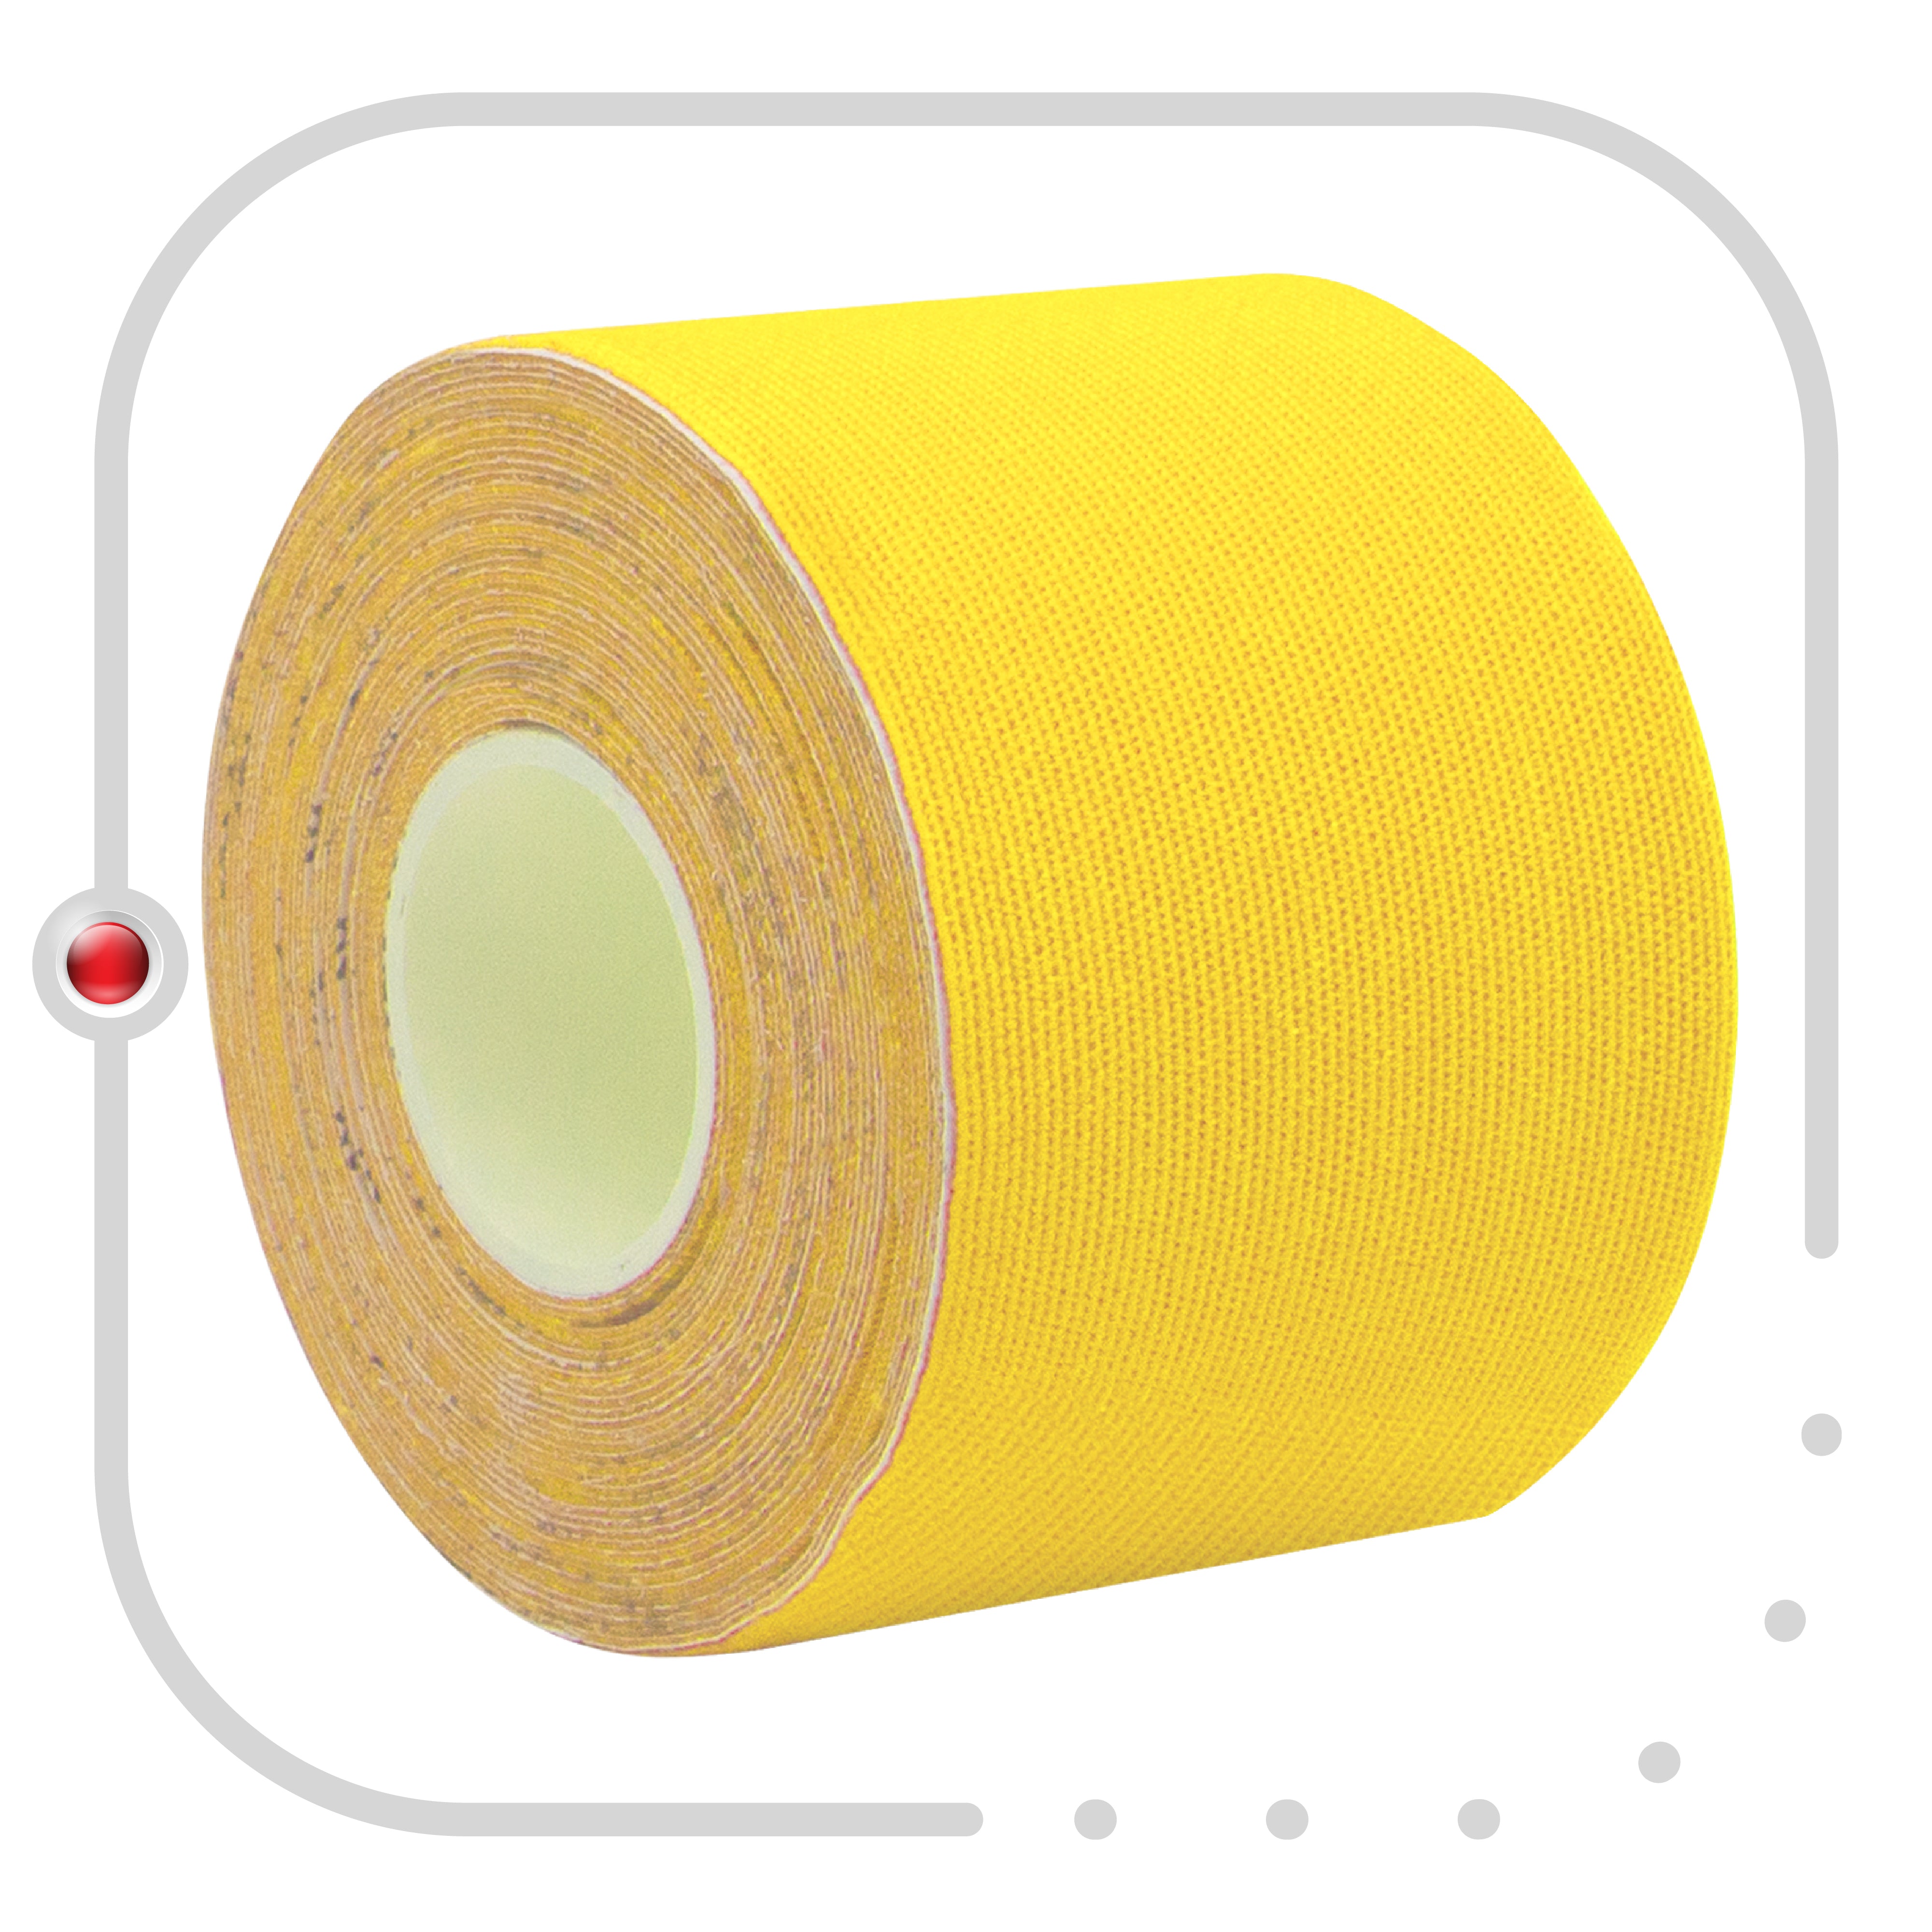 Yellow Kinesiology Tape Pre Cut with Dispenser - Athletic Sports Tape - For Healing and Recovery